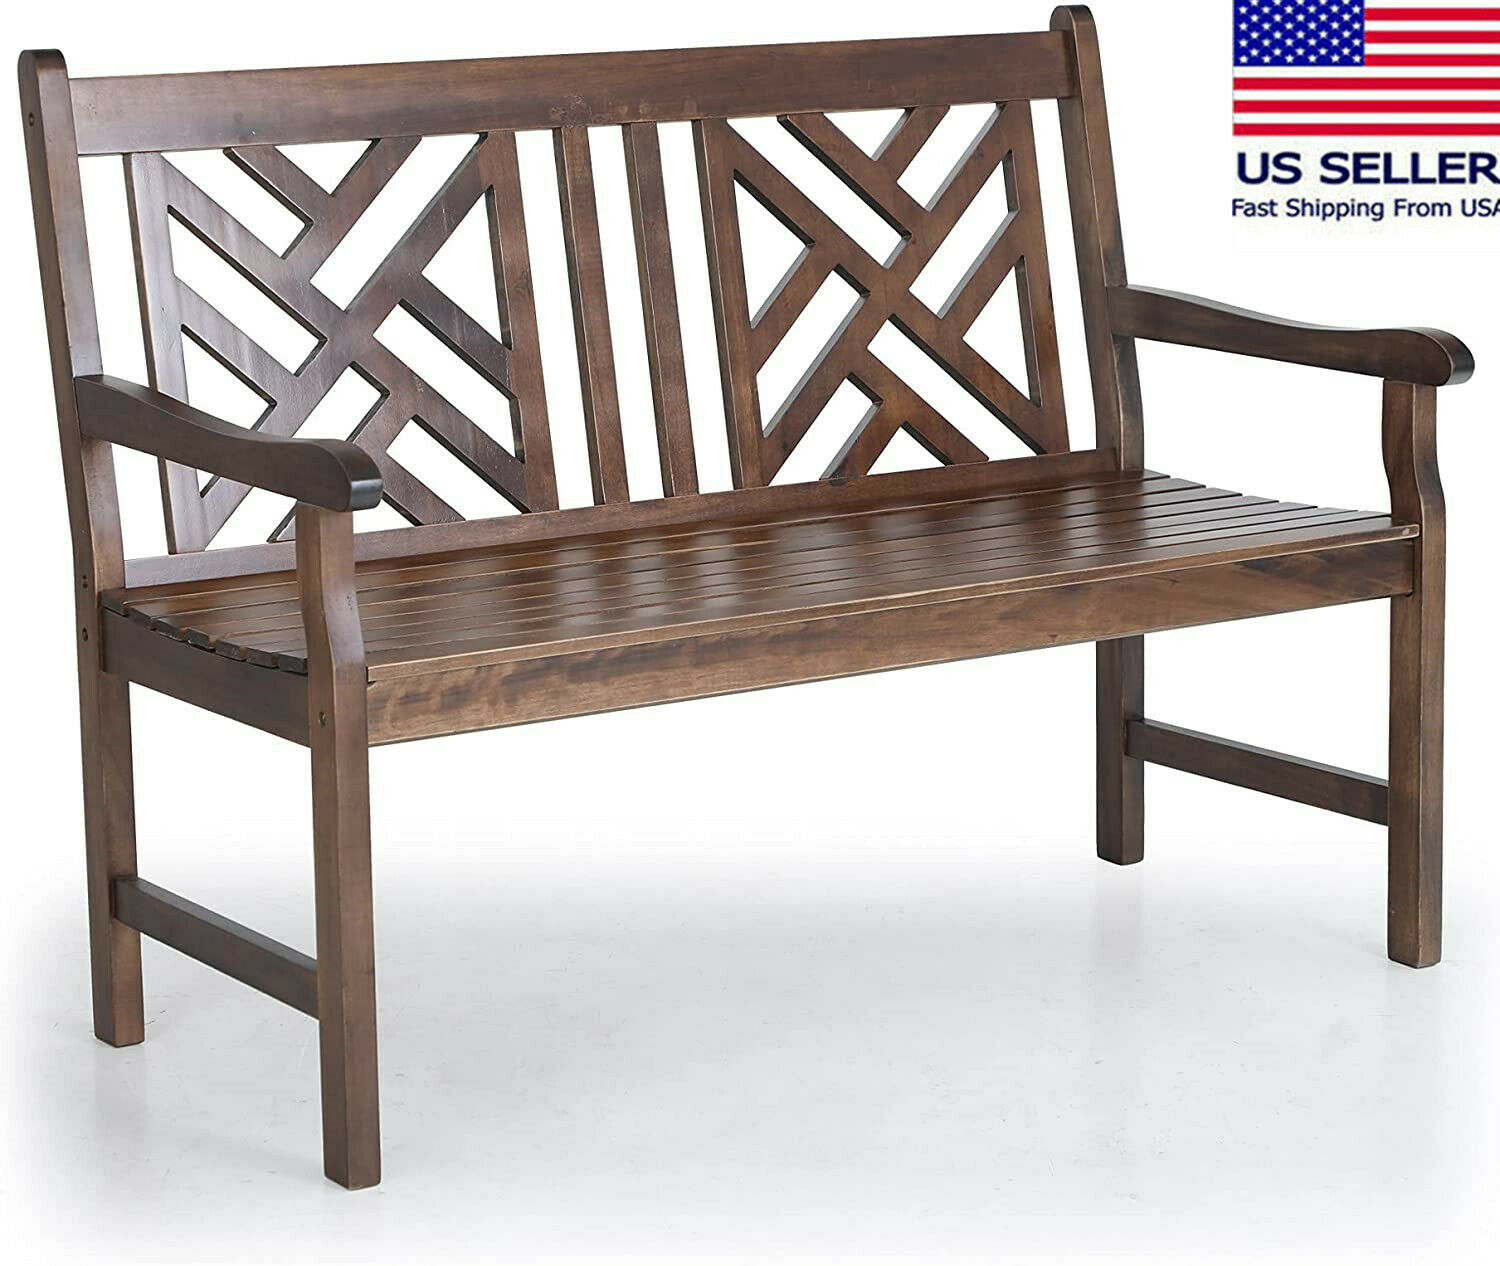 Outdoor Poplar Wood Bench Loveseat Patio Wooden Bench With Backrest And Armrests